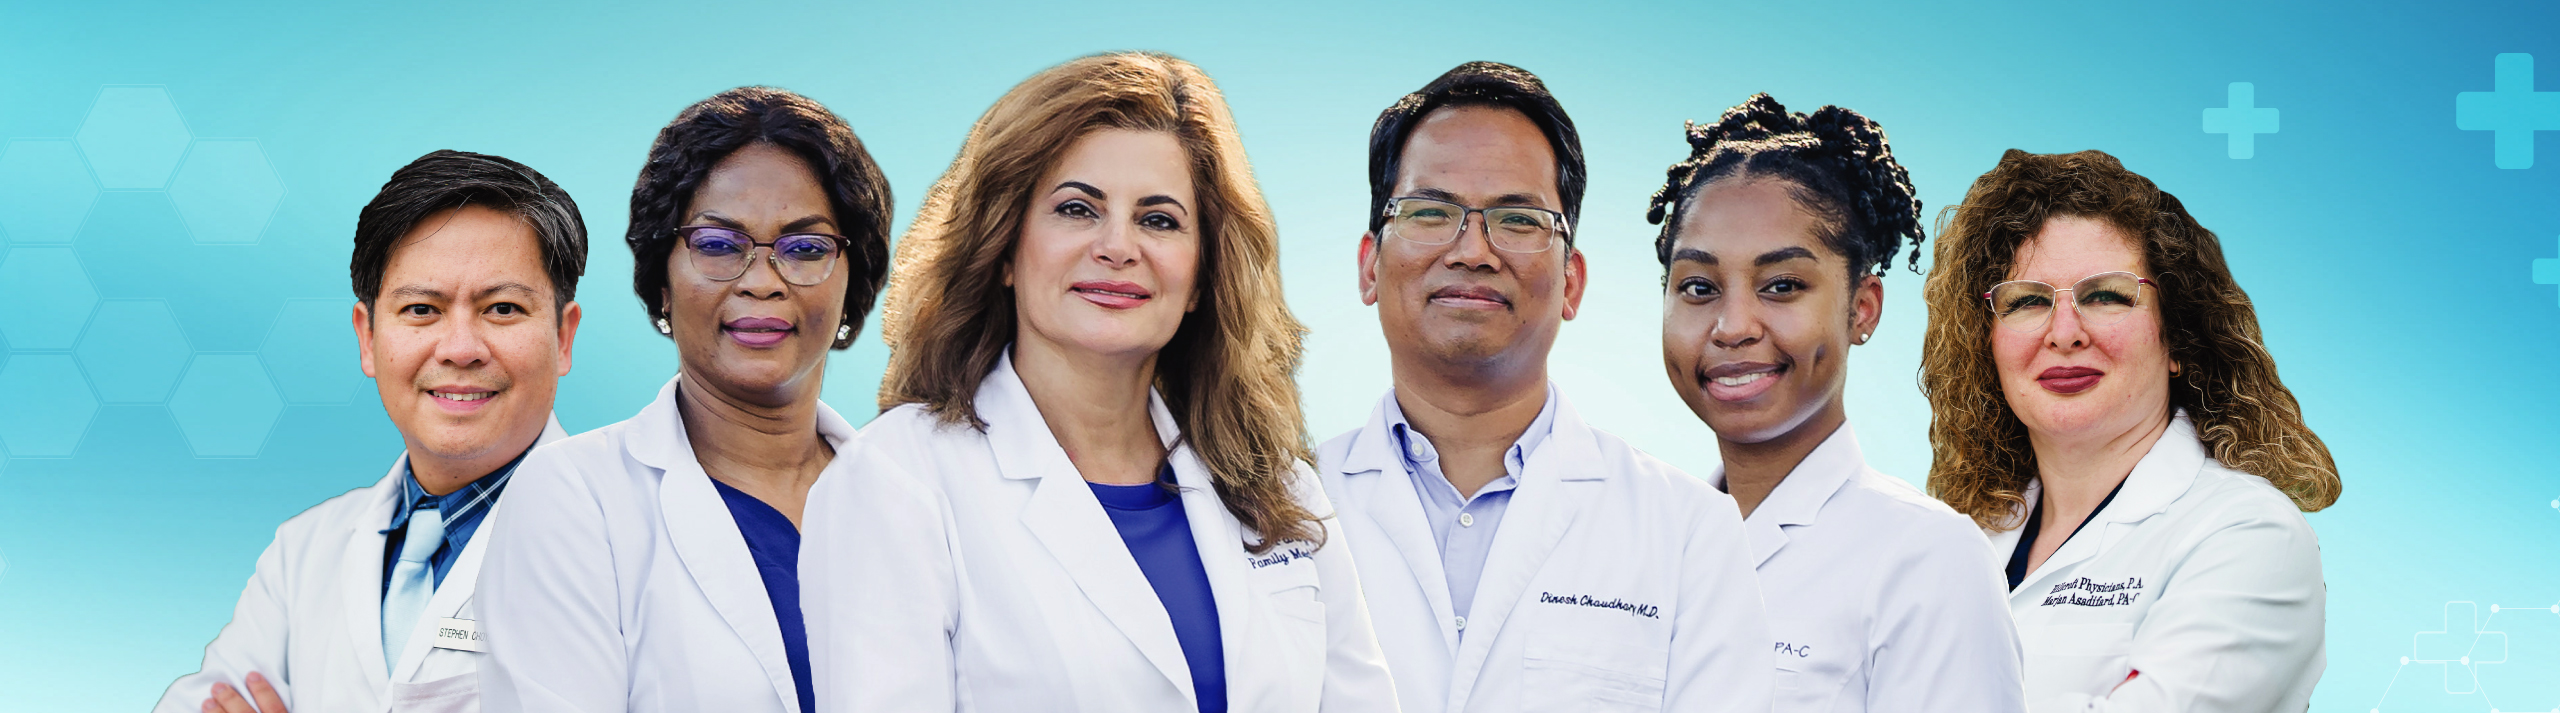 Dr. Farizani and the doctors of Hillcroft Physicians